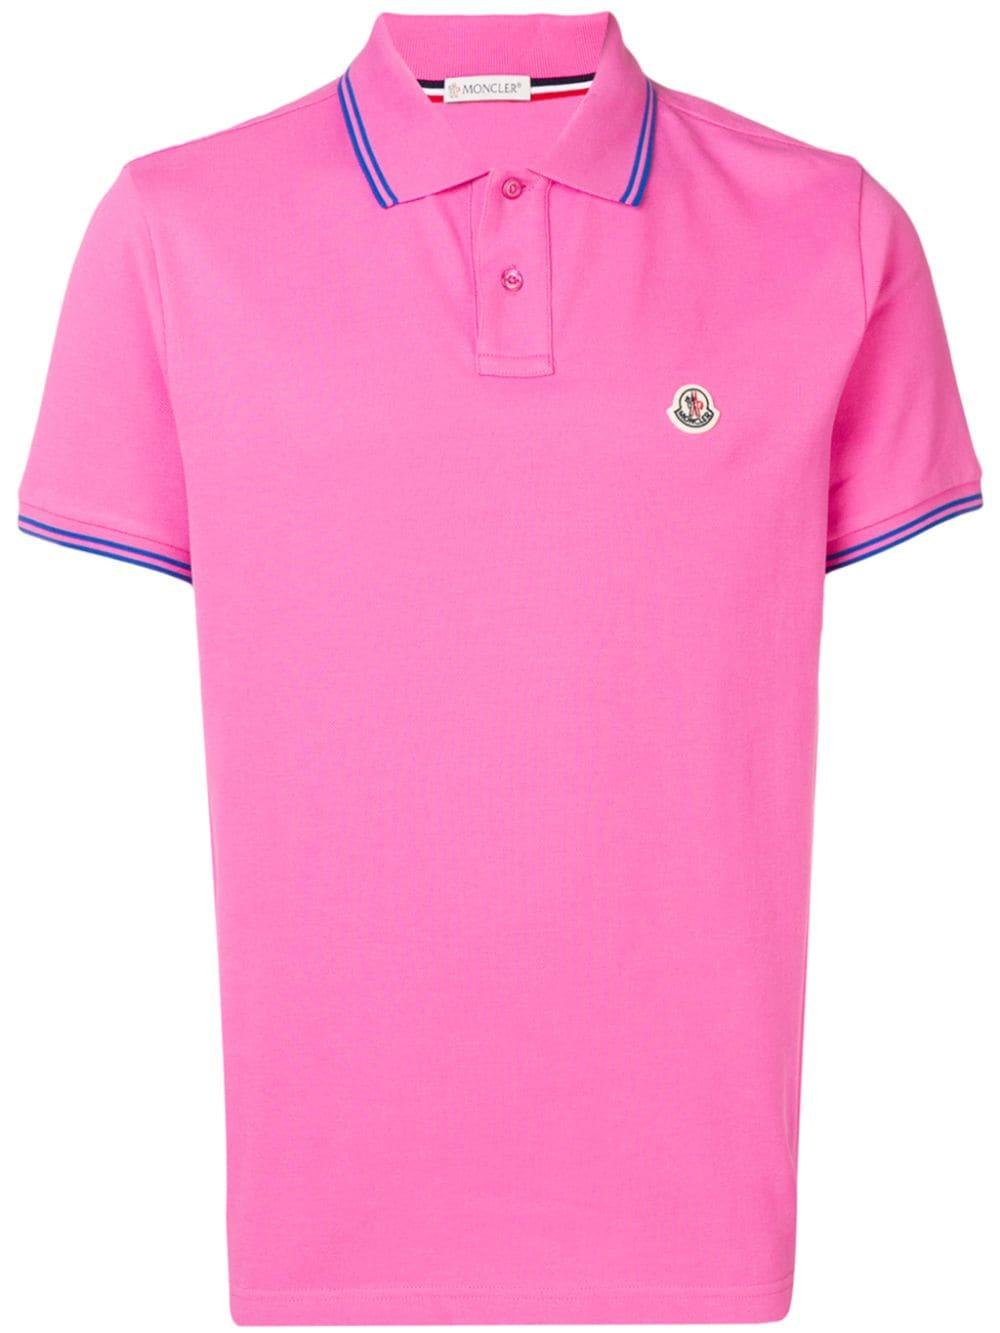 Moncler Logo Patch Polo Shirt in Pink for Men - Lyst